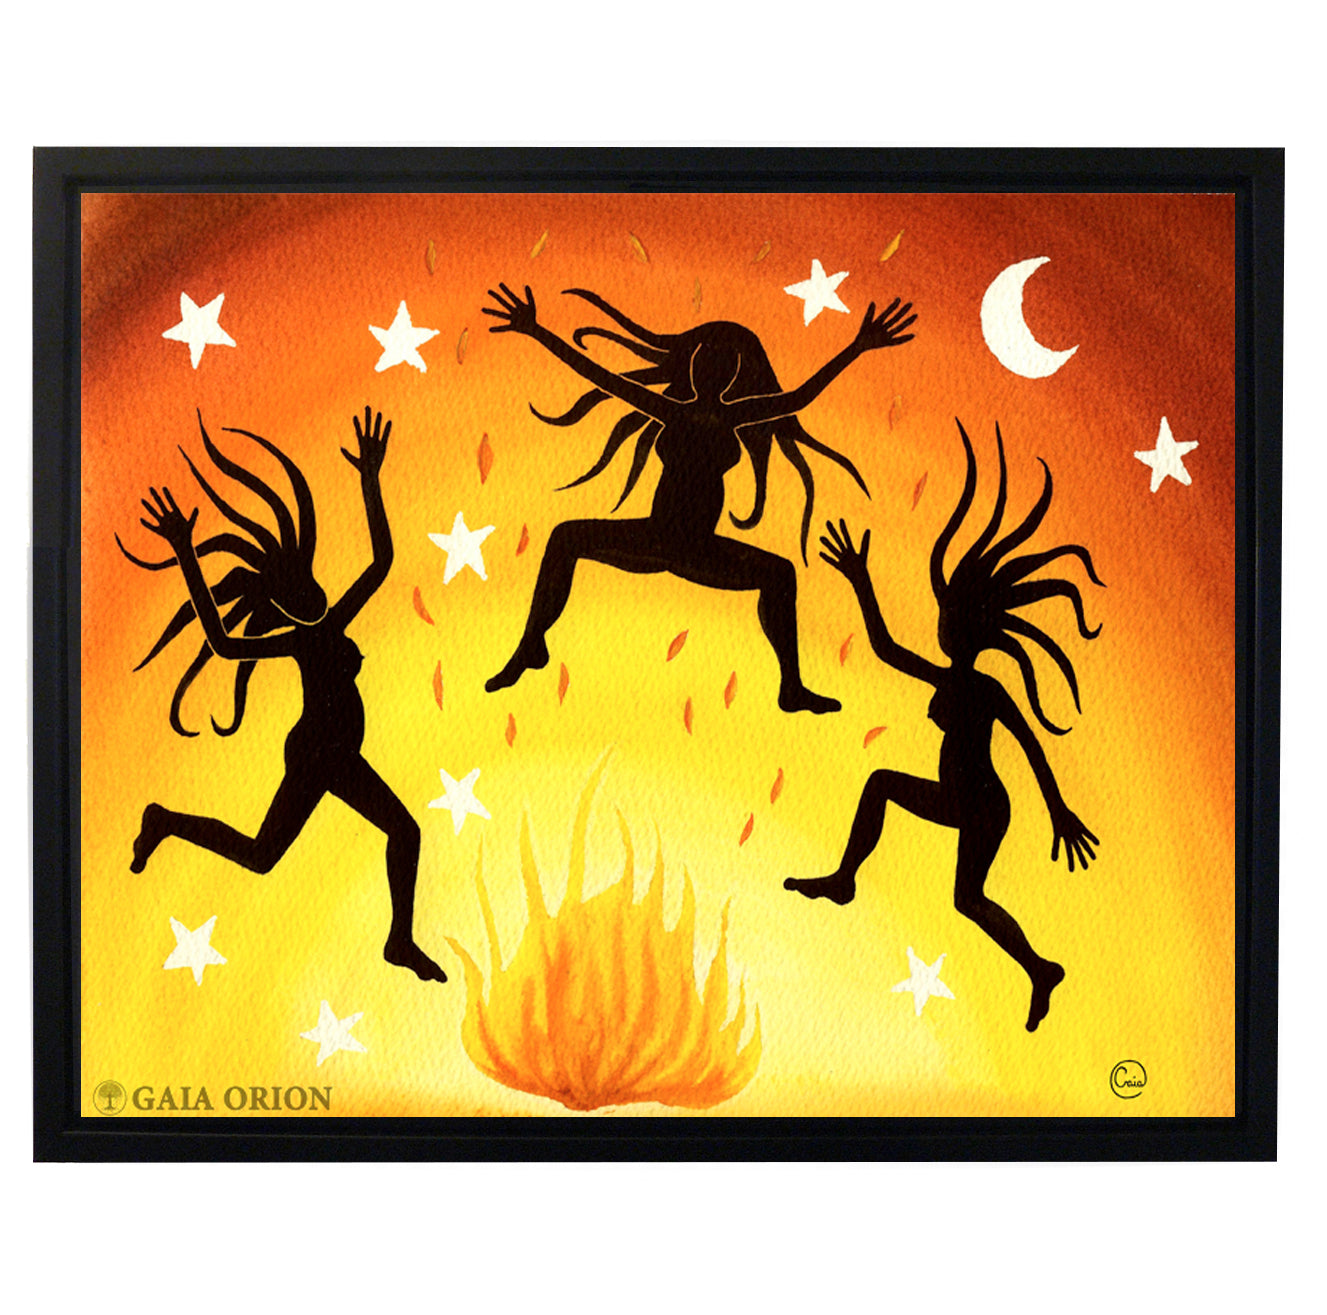 three crazy naked women having fun around a fire naked being silly and free of judgement under stars and moon